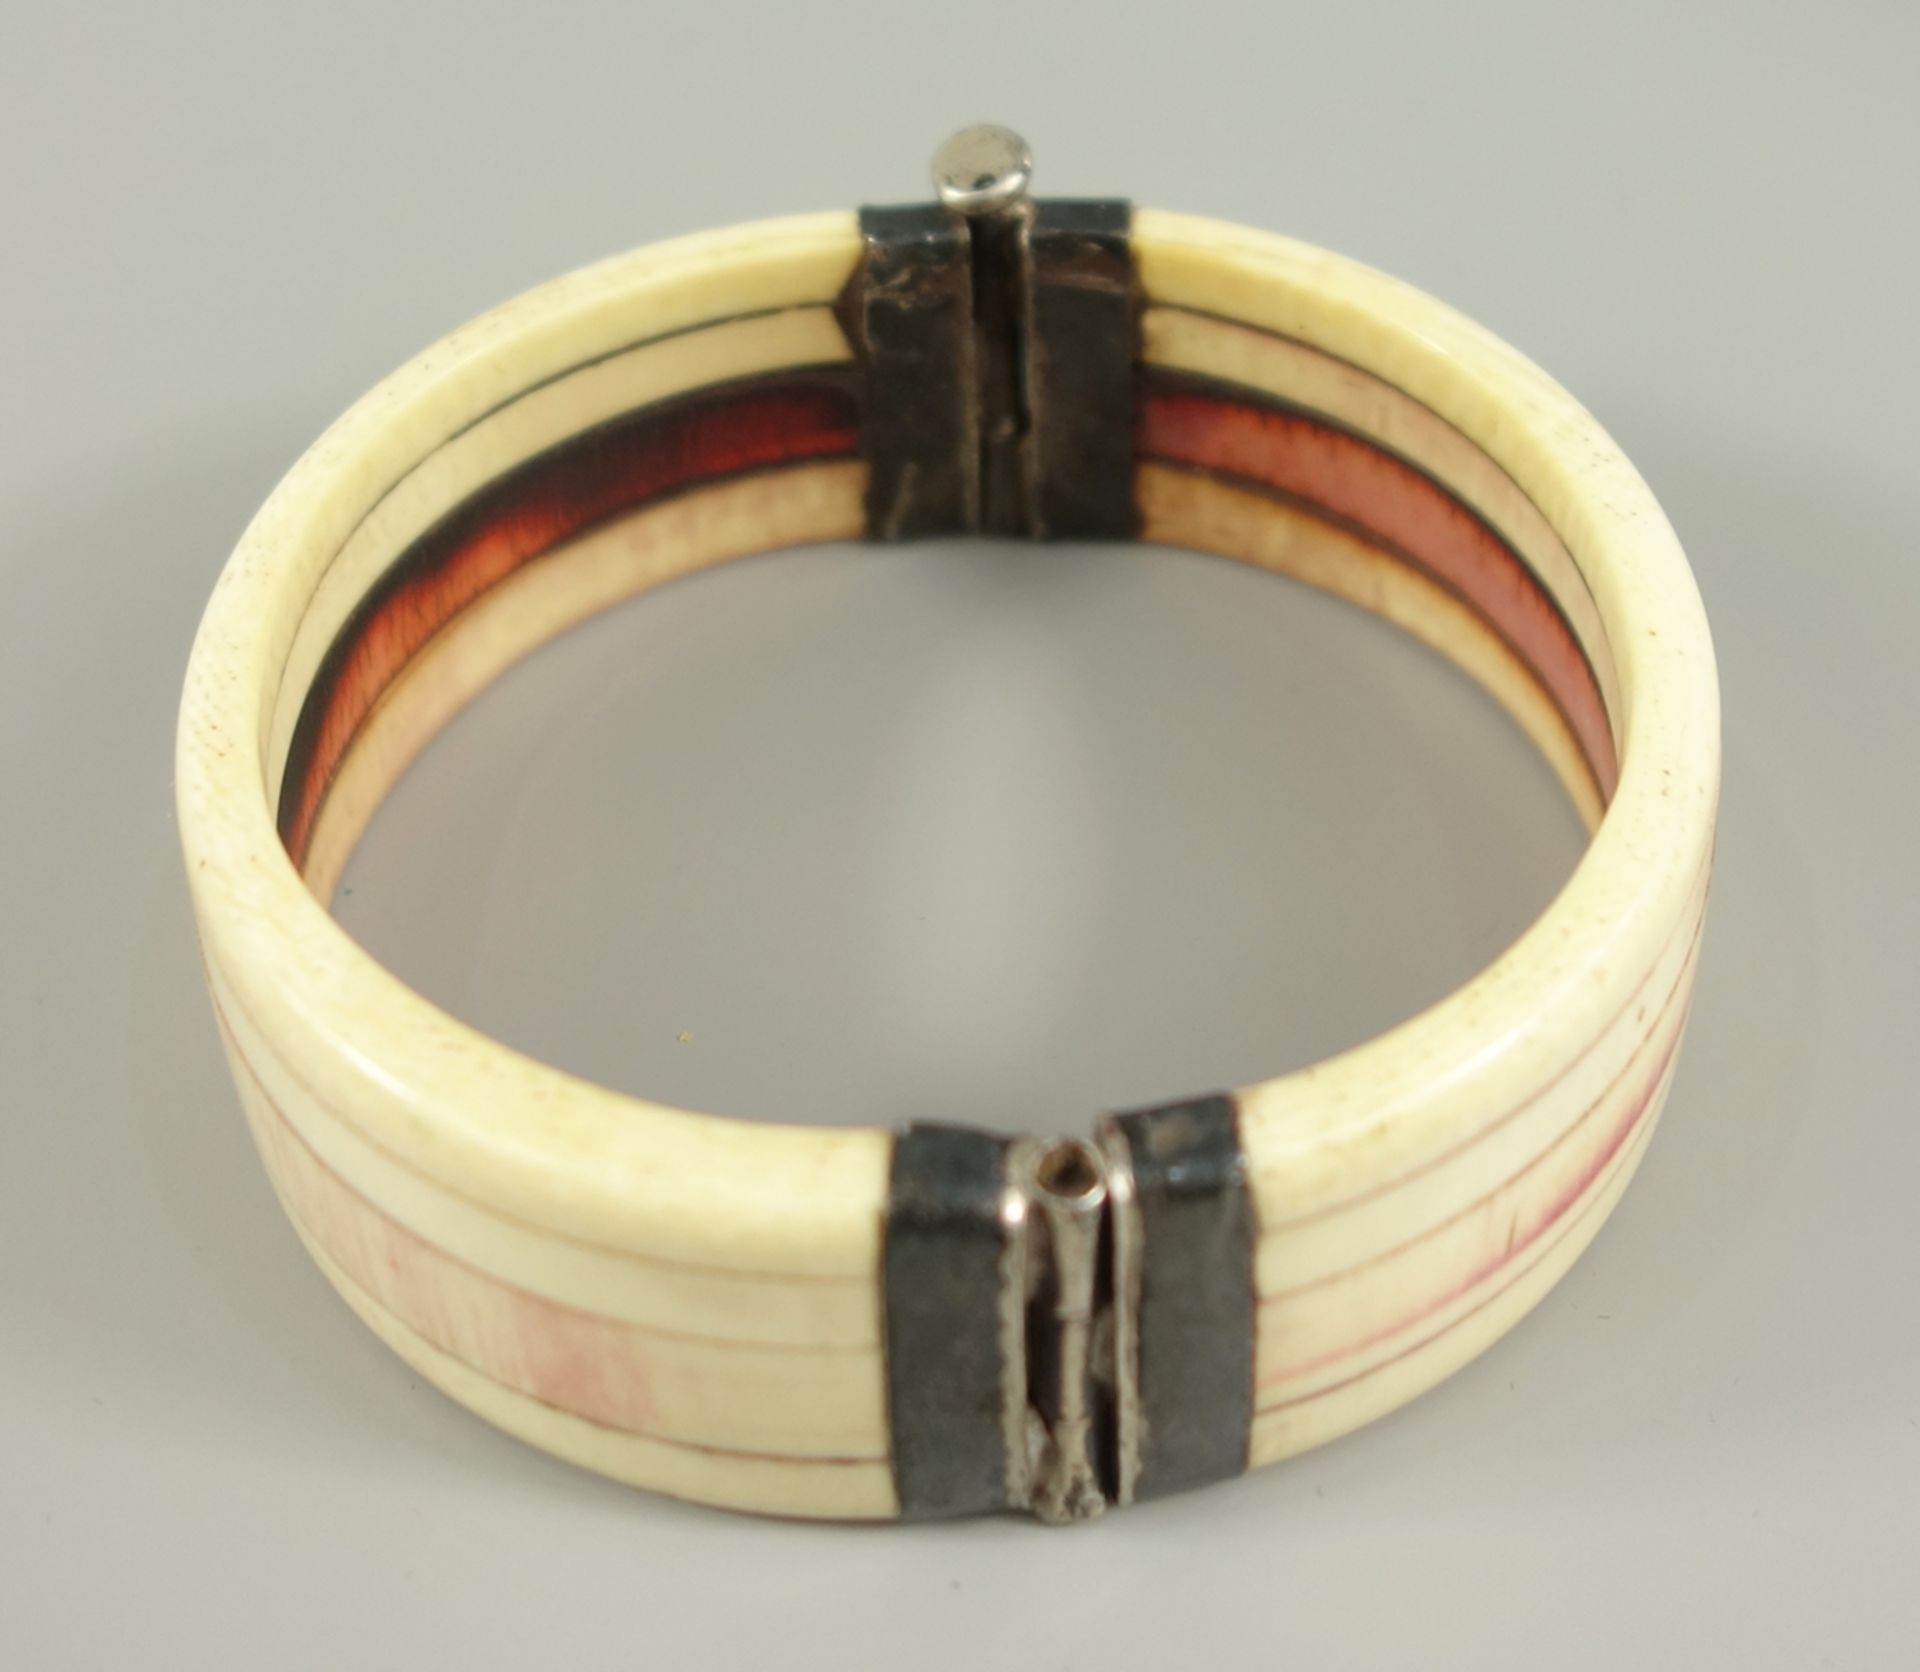 Bangle of bone with silver mounting - Image 2 of 2